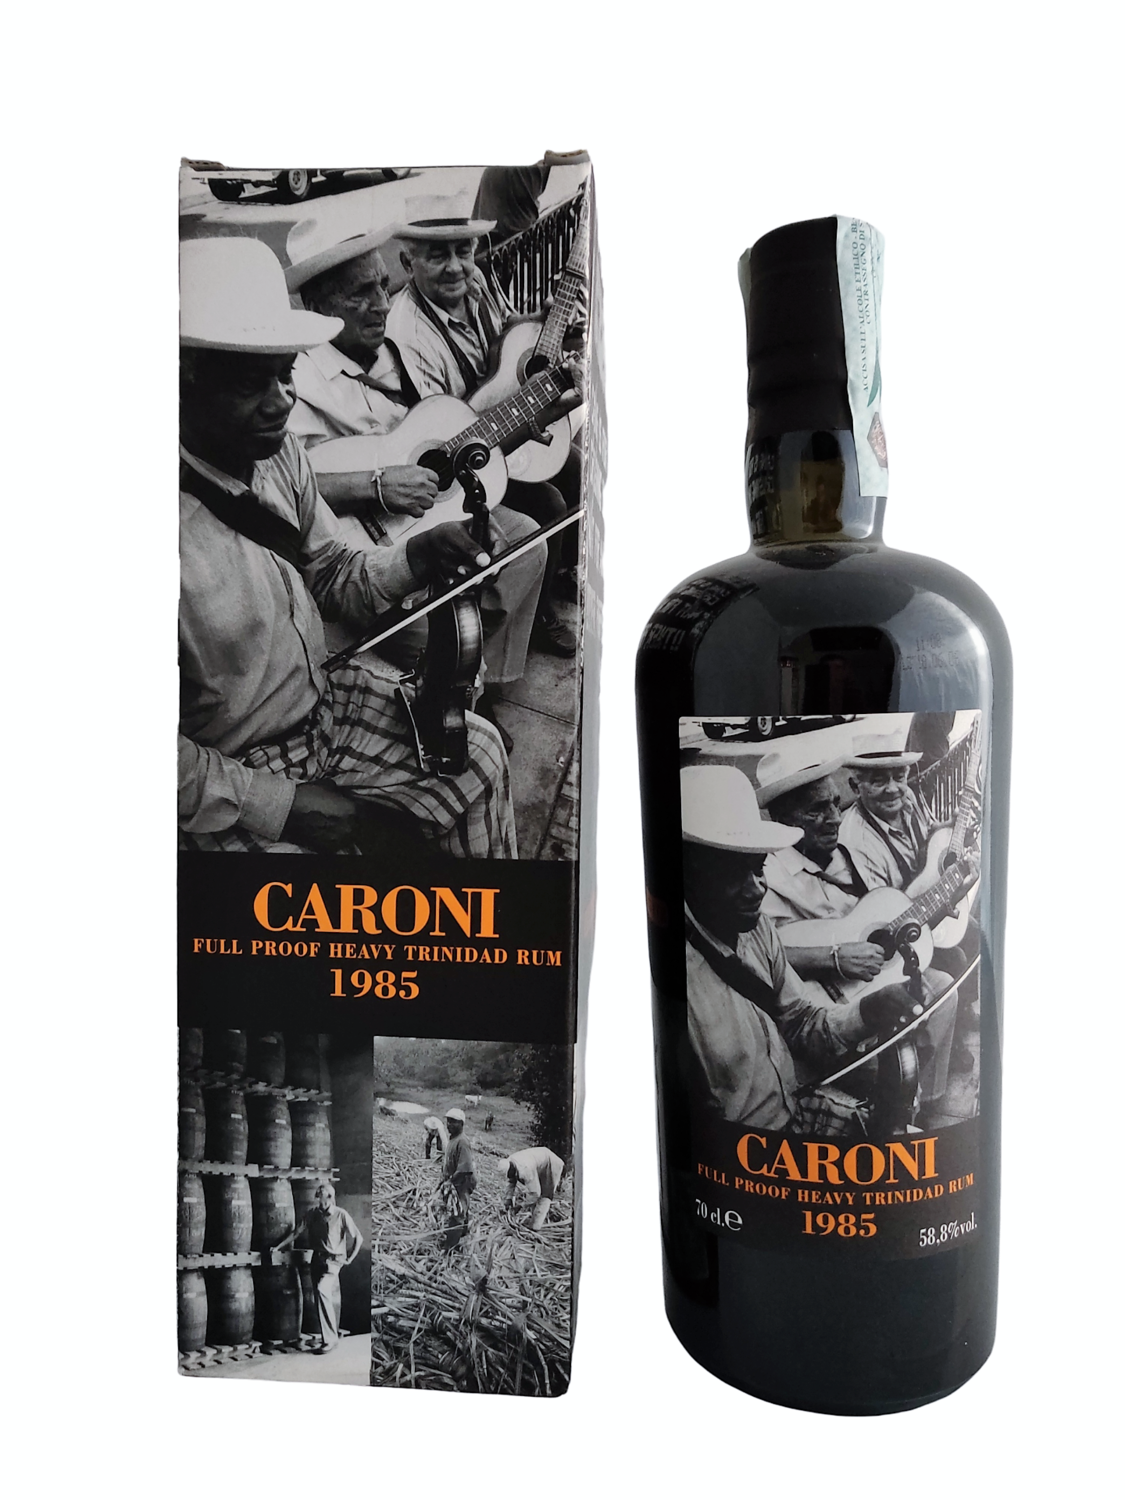 Caroni - 21y Vintage 1985 Full Proof Heavy for Velier - 70 cl - 58.8%